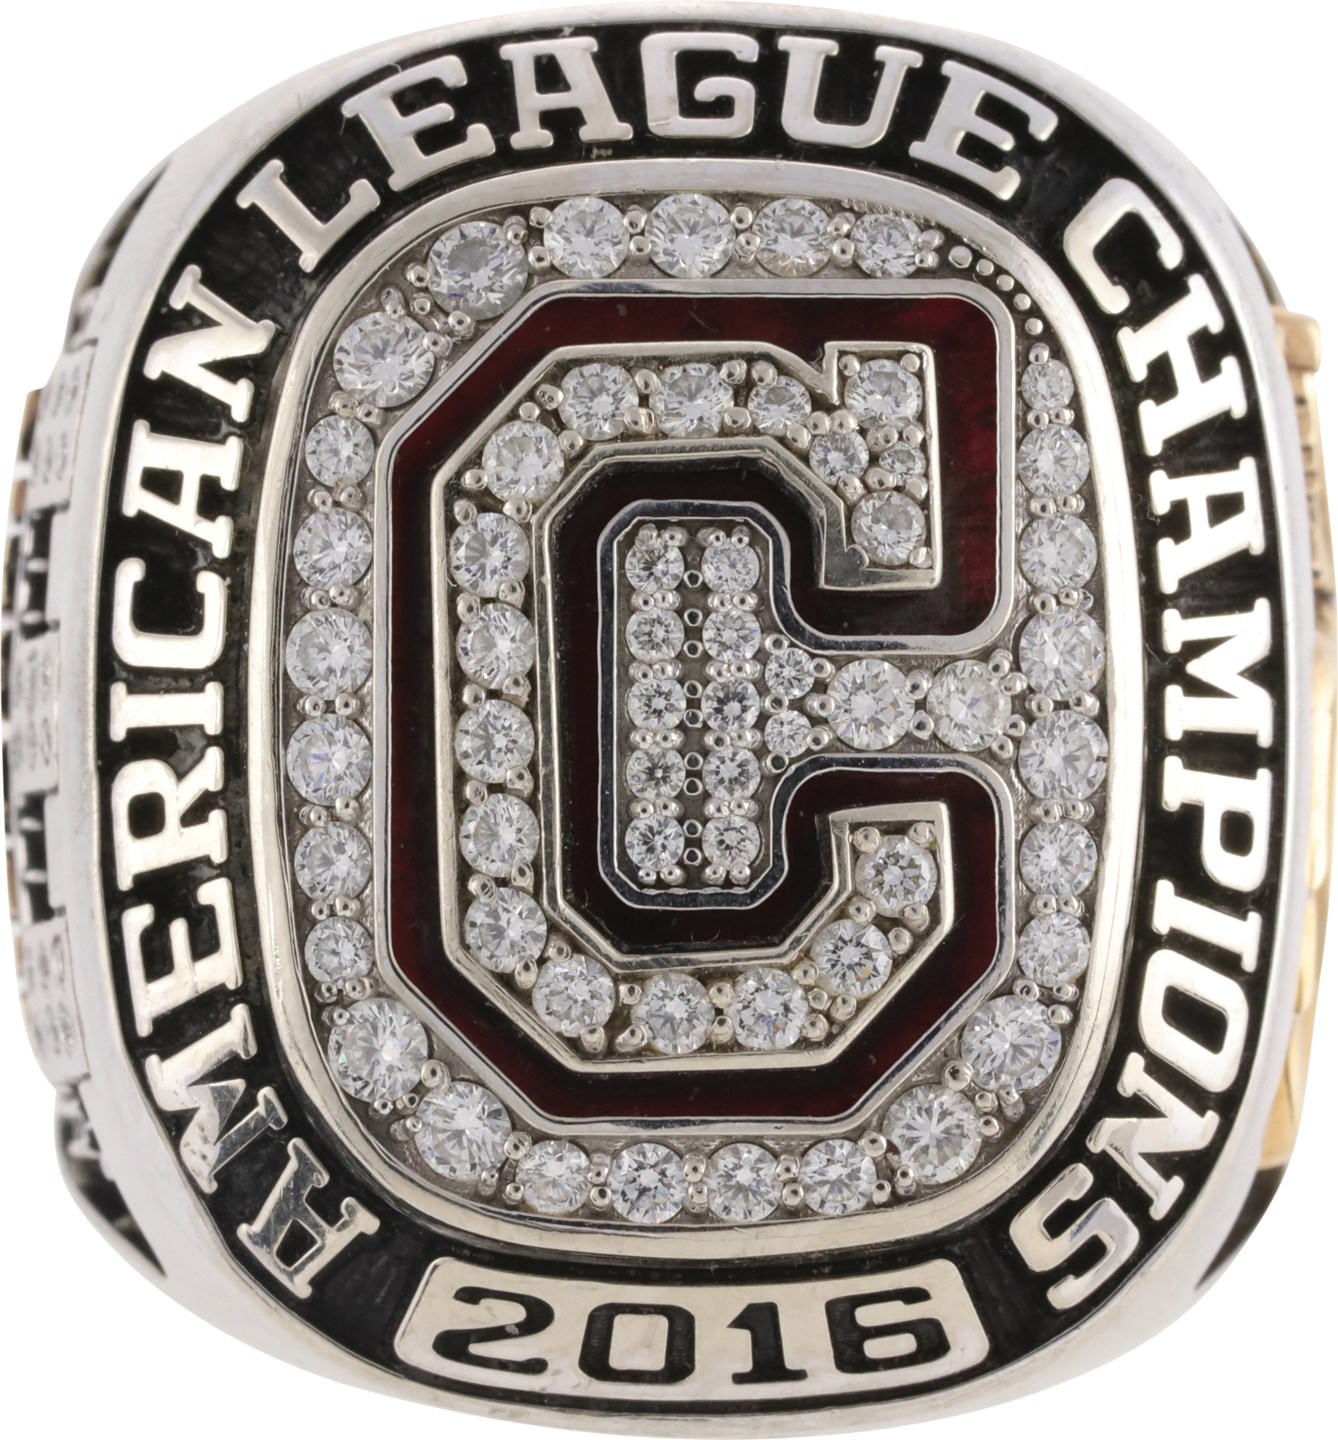 - 2016 Cleveland Indians American League Championship Ring